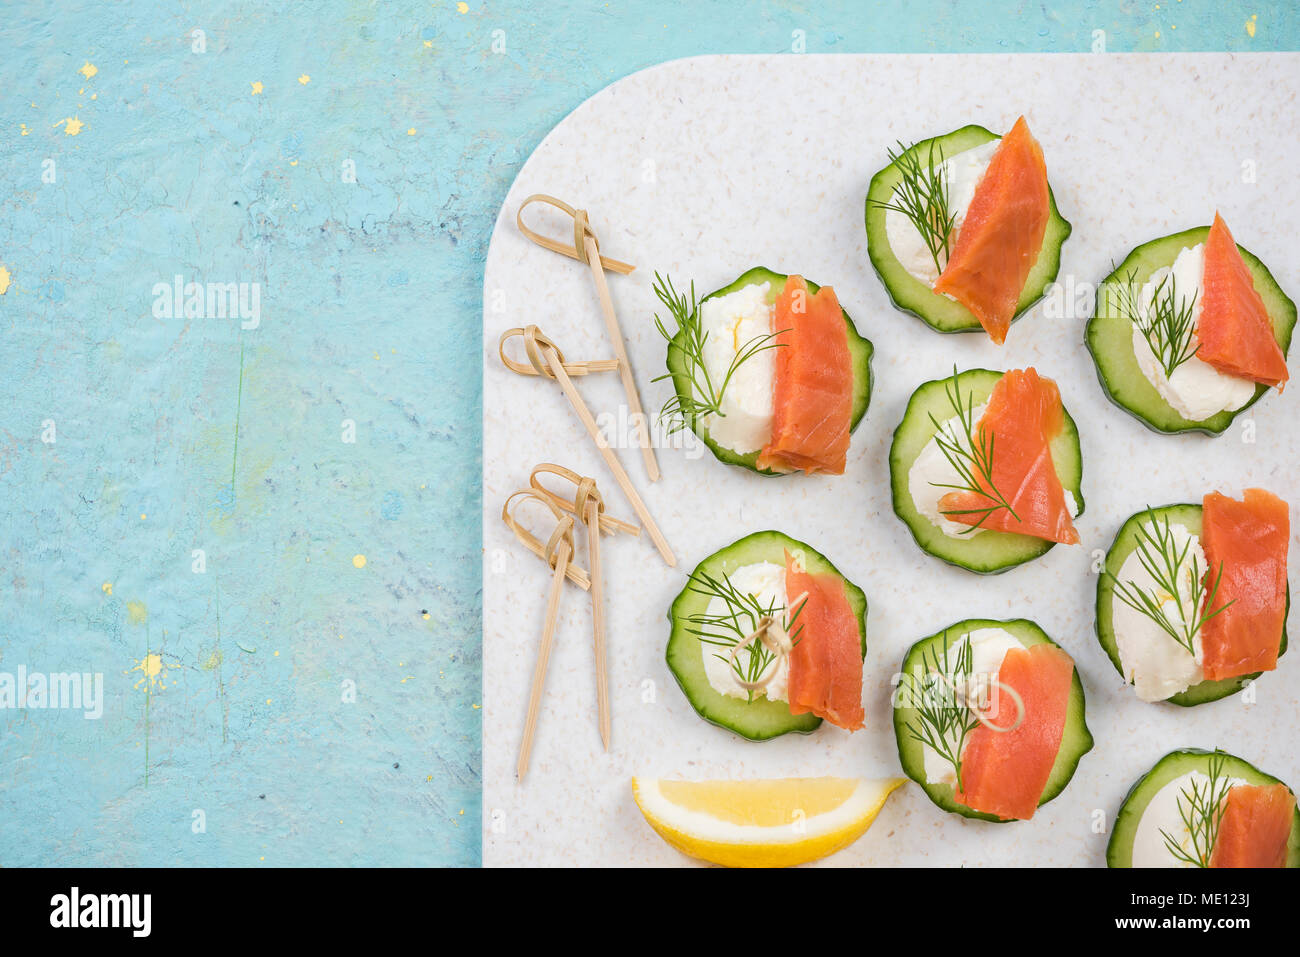 Smoked salmon, cottage cheese and cucumber snack for garden party. Stock Photo